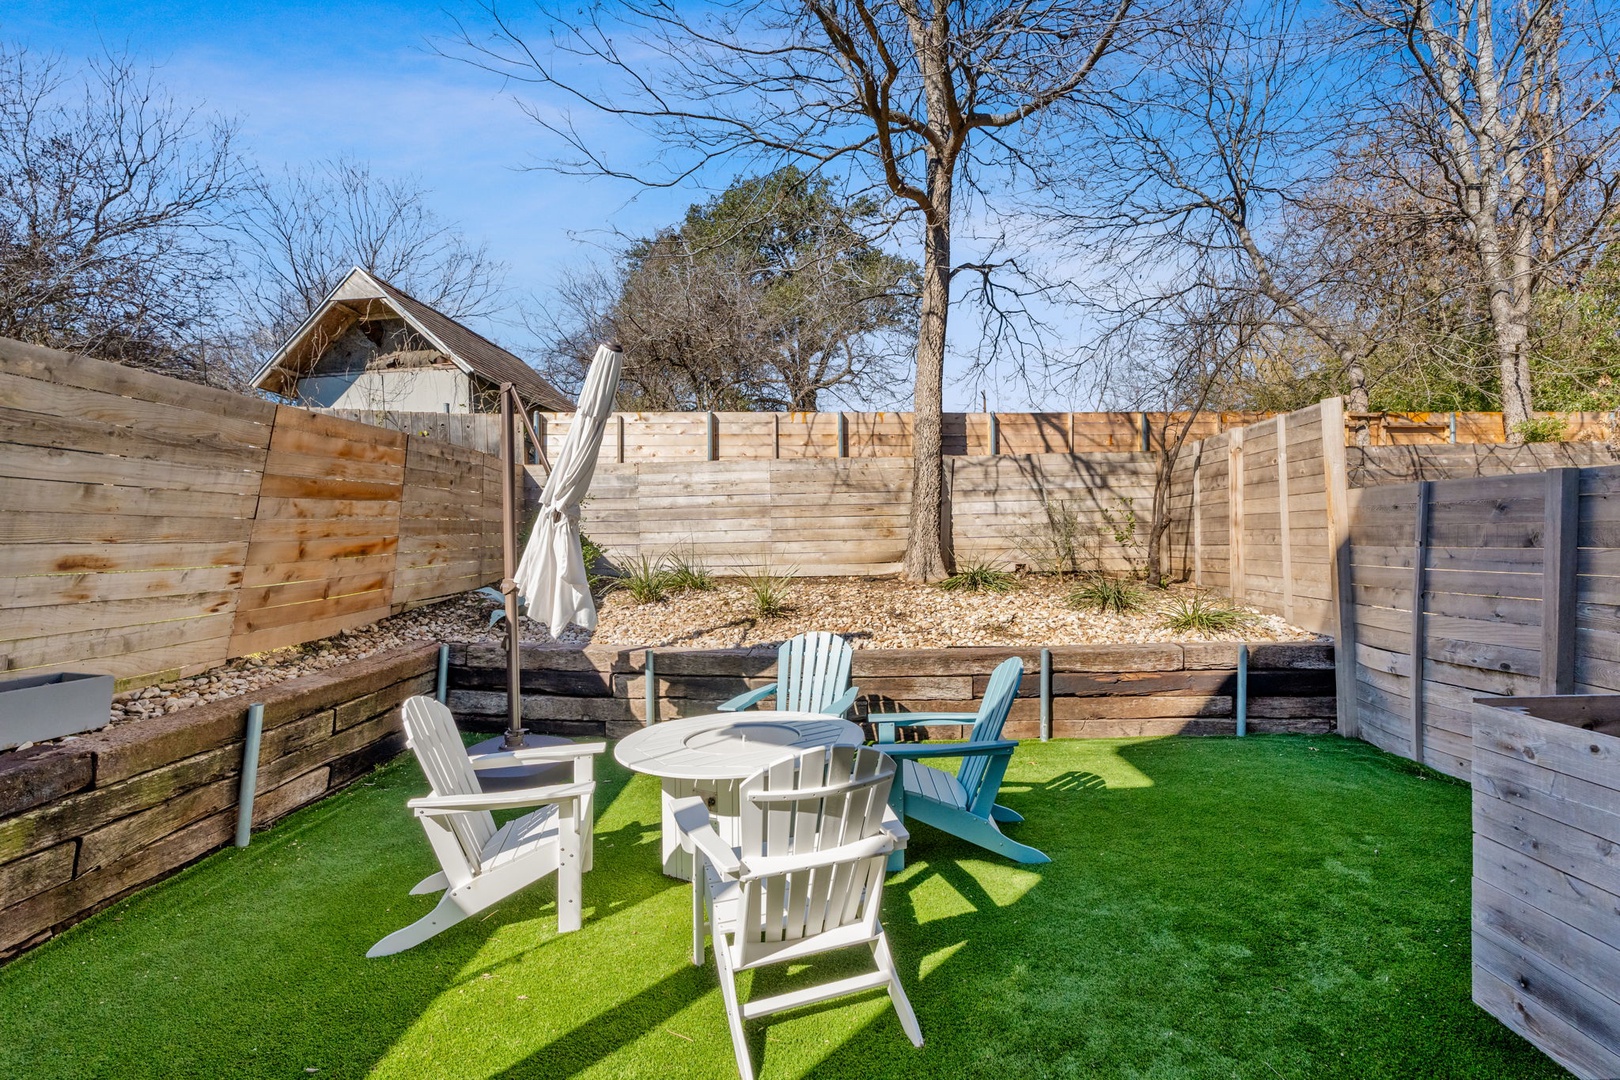 Dine alfresco or lounge by the firepit in the spacious, private back yard